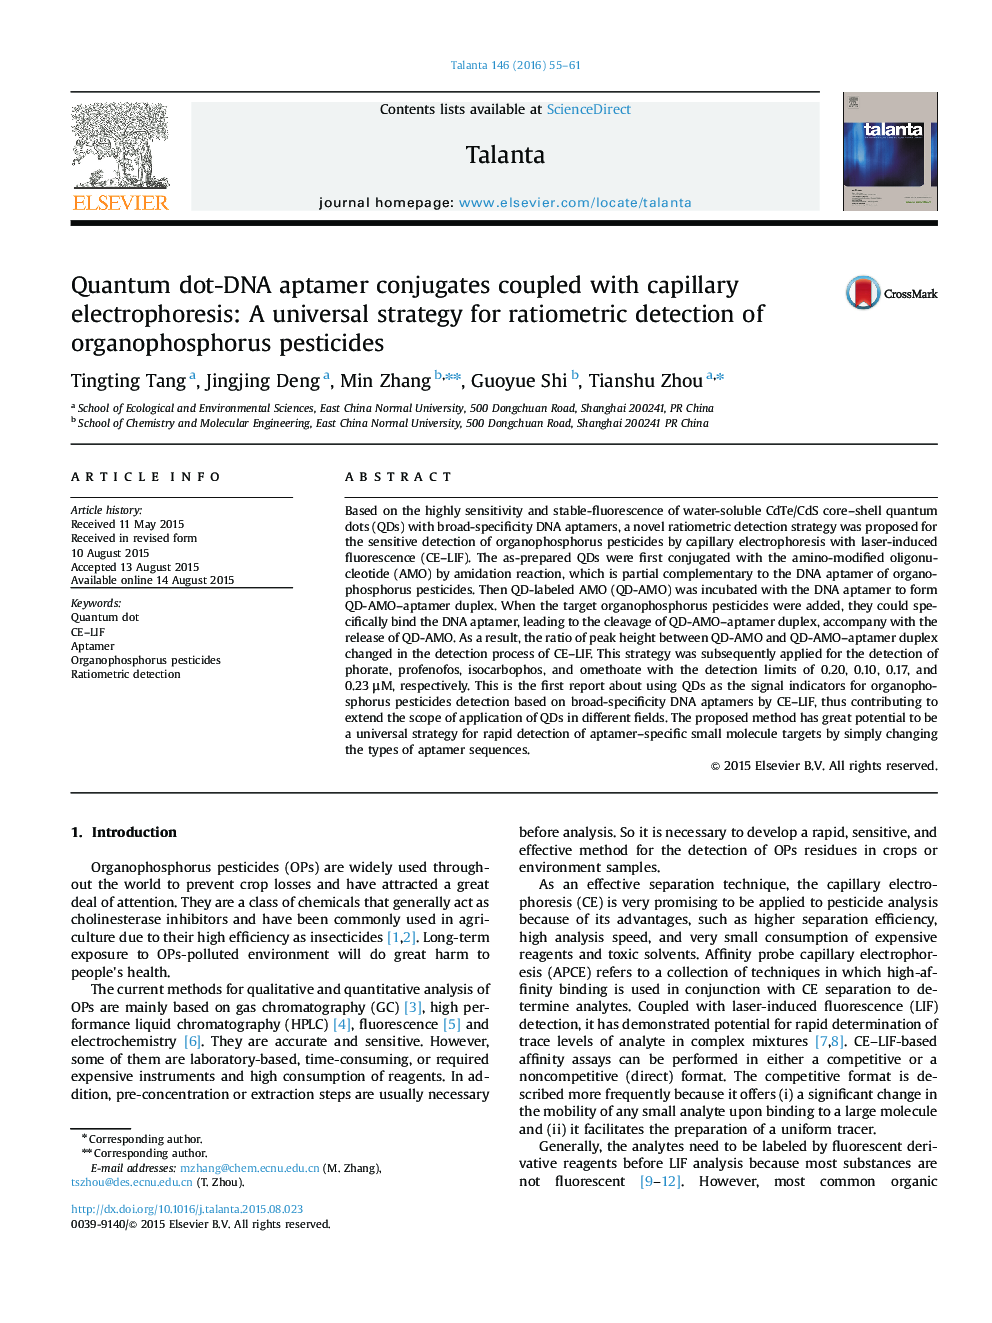 Quantum dot-DNA aptamer conjugates coupled with capillary electrophoresis: A universal strategy for ratiometric detection of organophosphorus pesticides